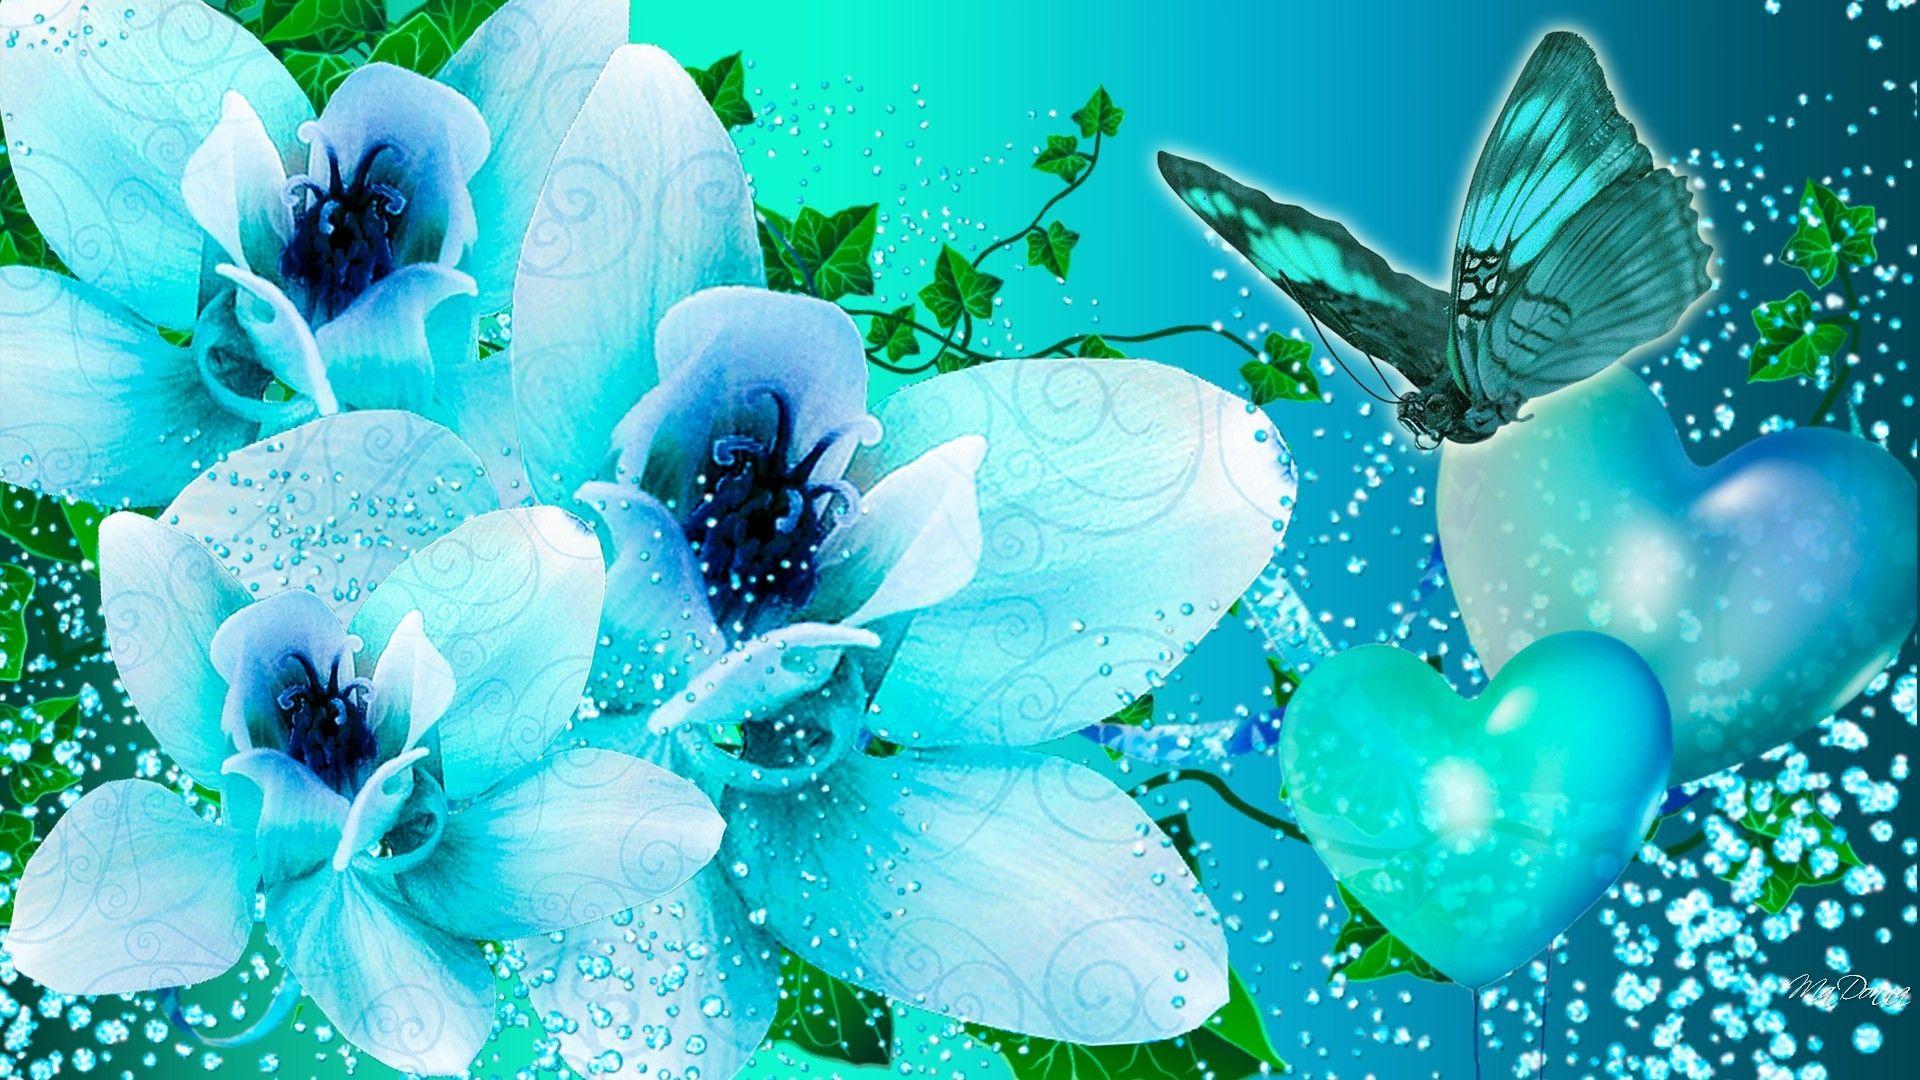 Flowers: Sparkles Orchid Turquoise Bright Ivy Flowers Aquaa